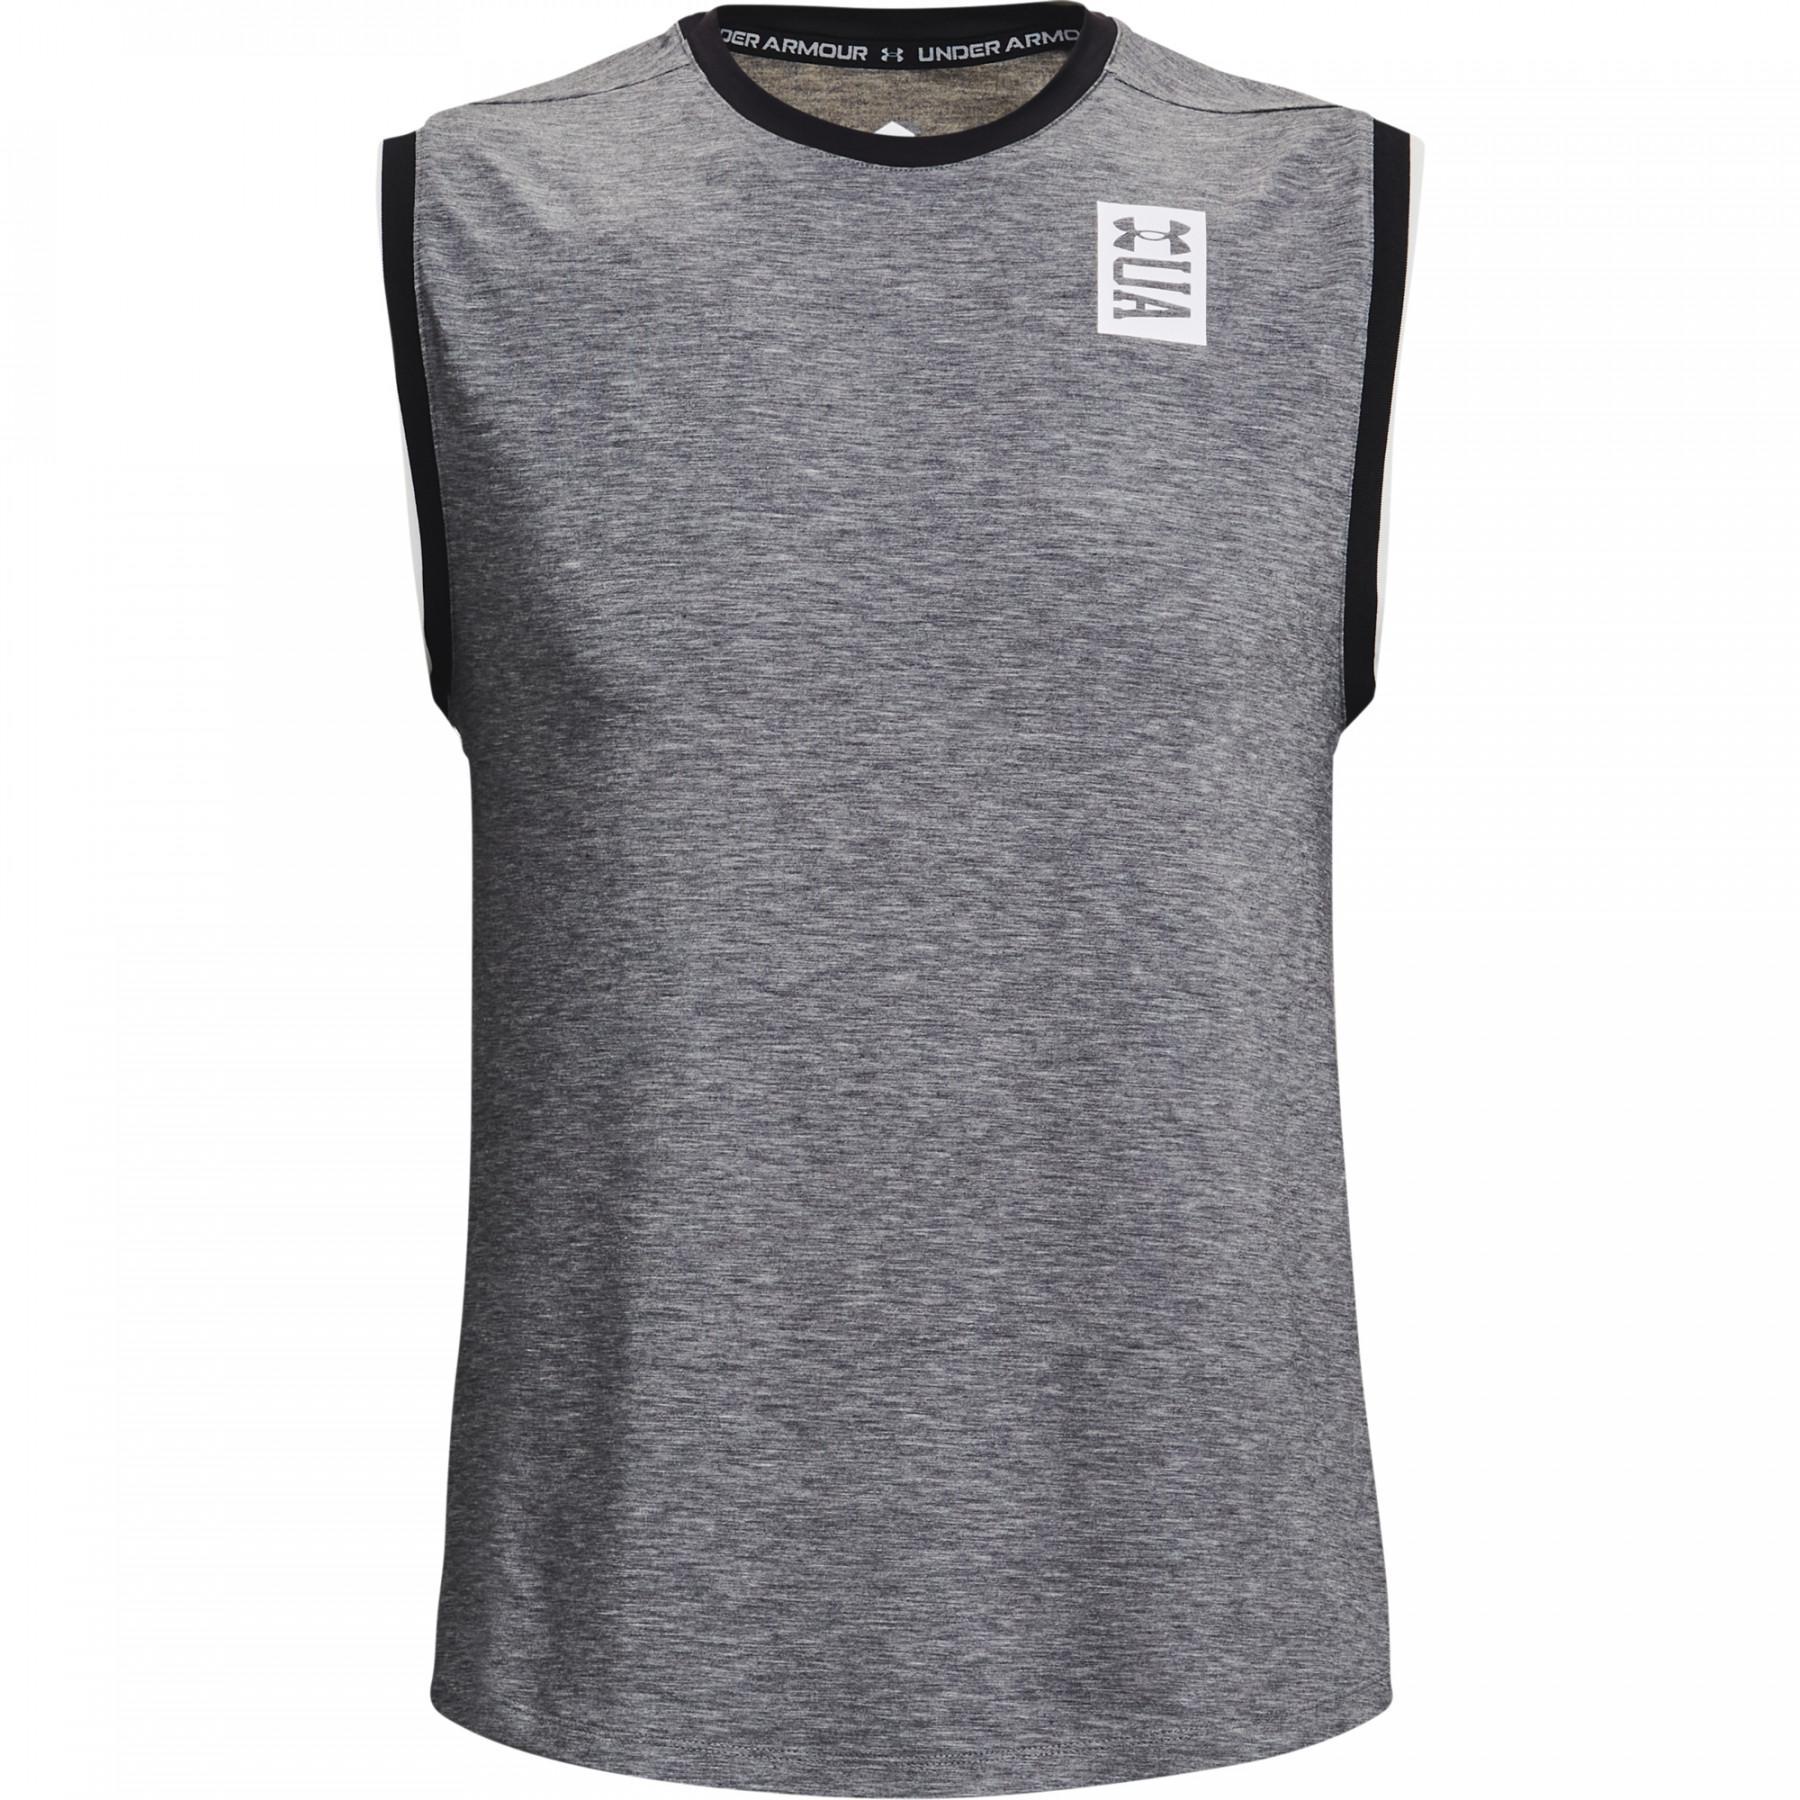 Tank top Under Armour recover